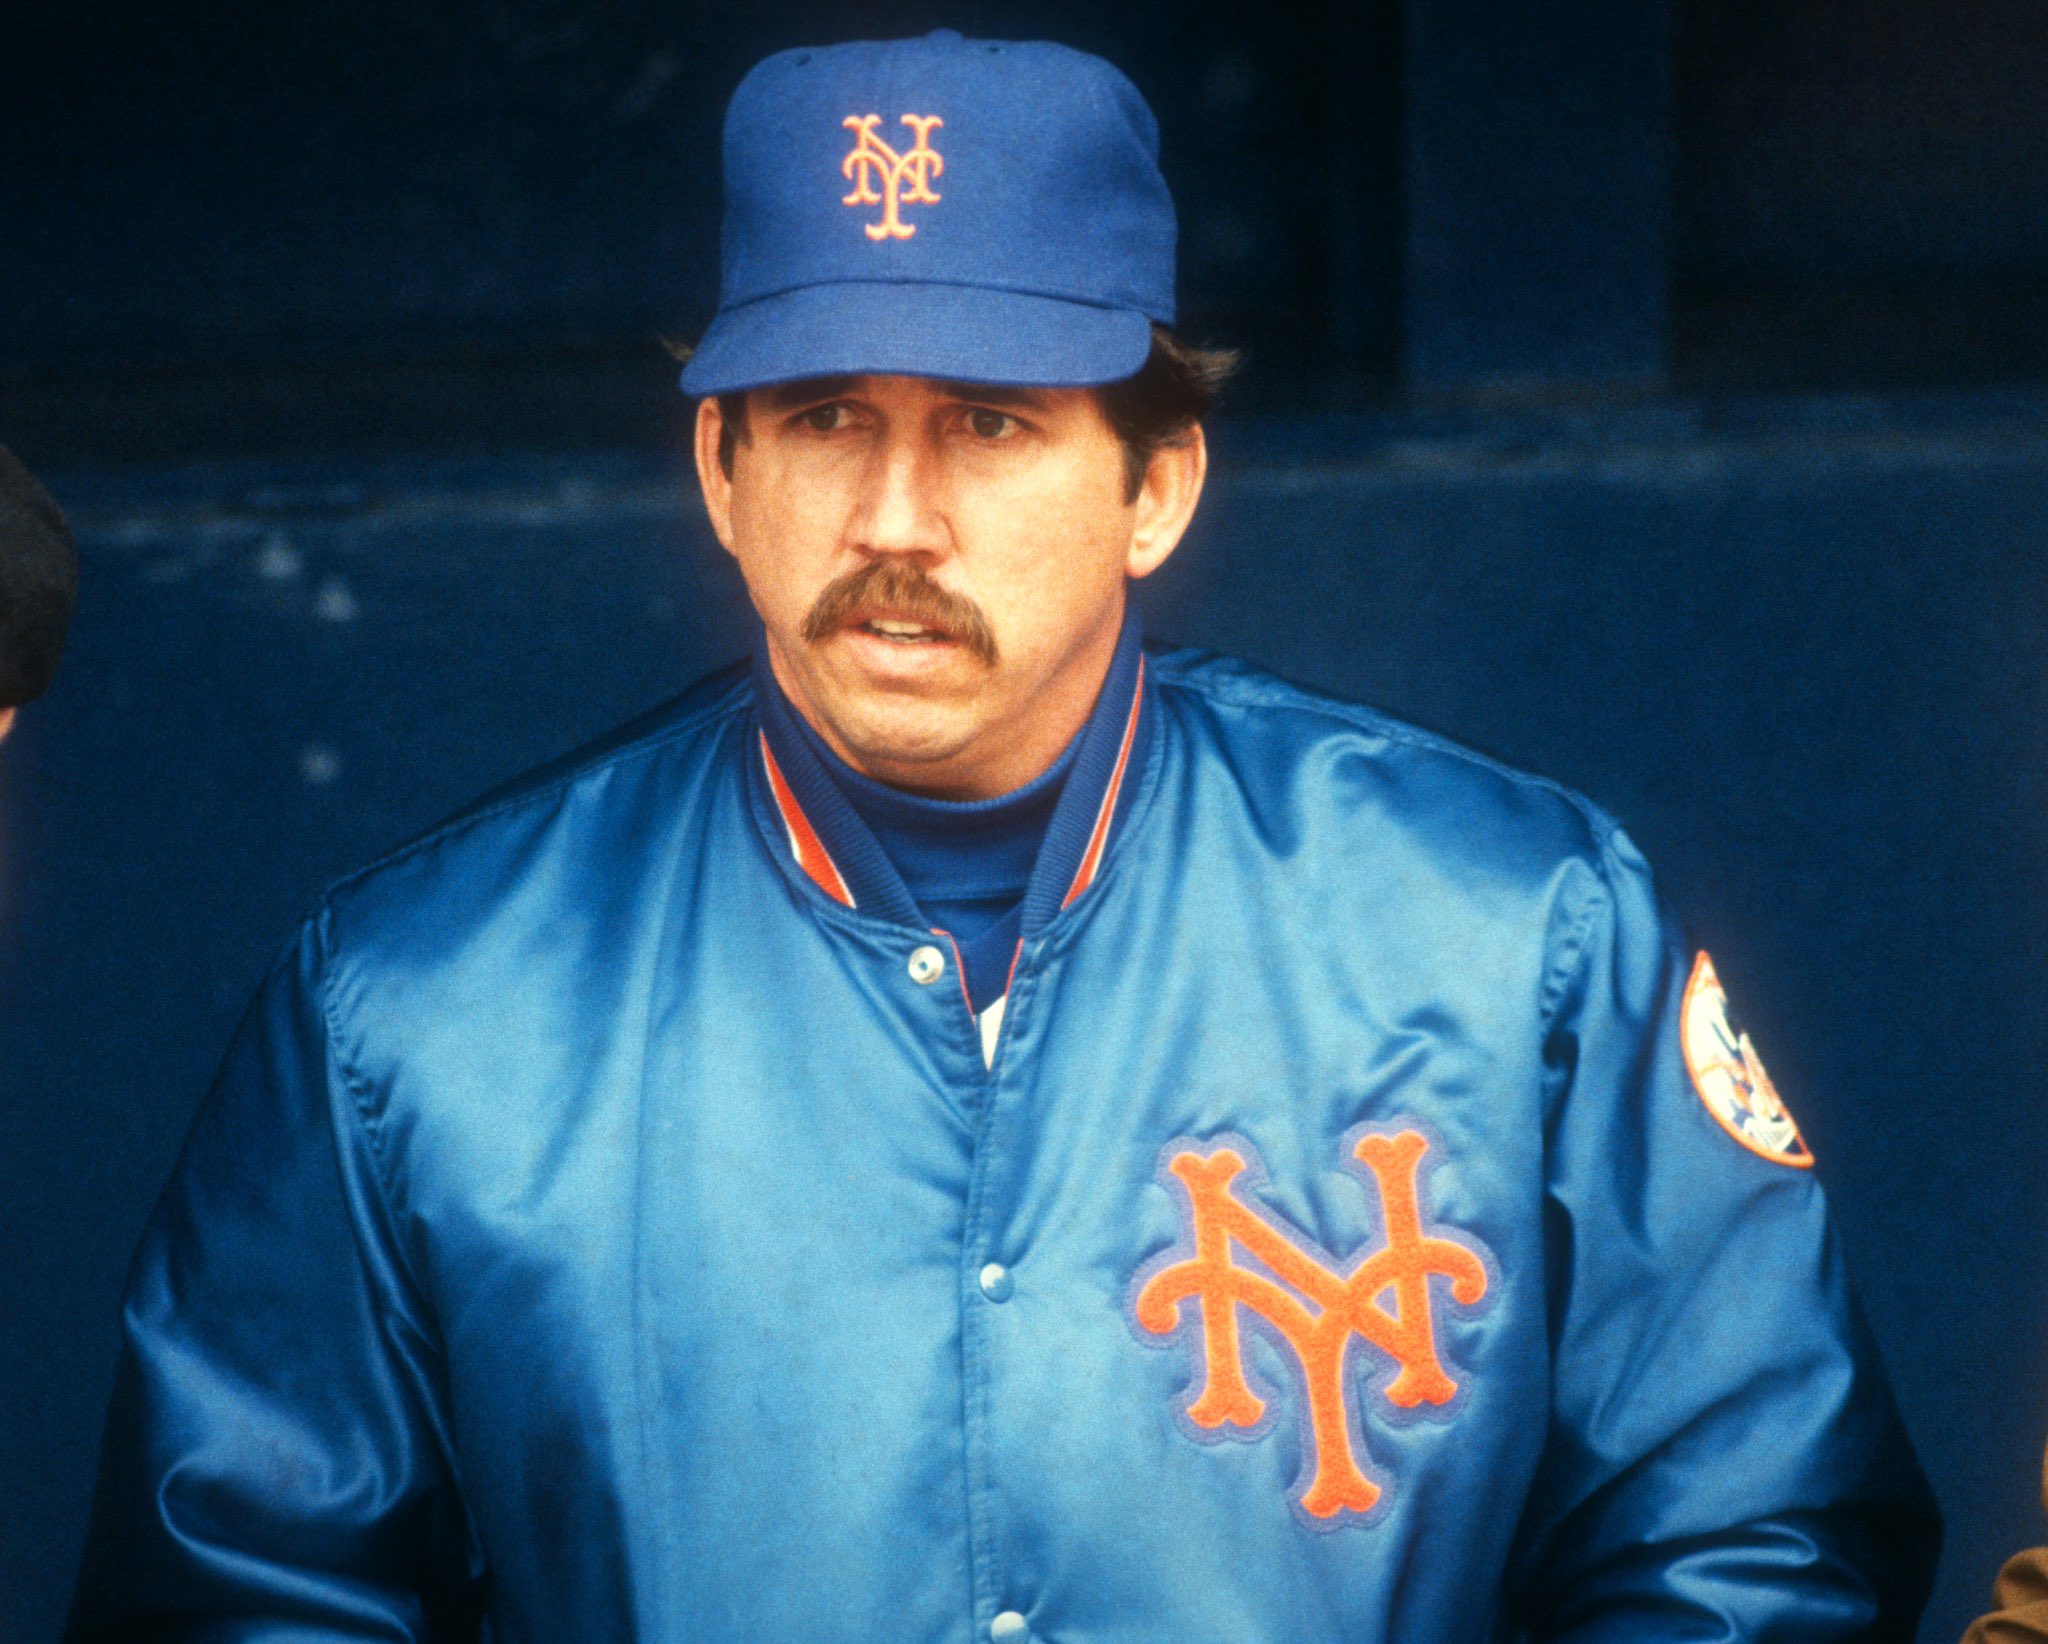 Happy birthday and best wishes to Davey Johnson, the winningest manager in Mets history, who turns 78 today 